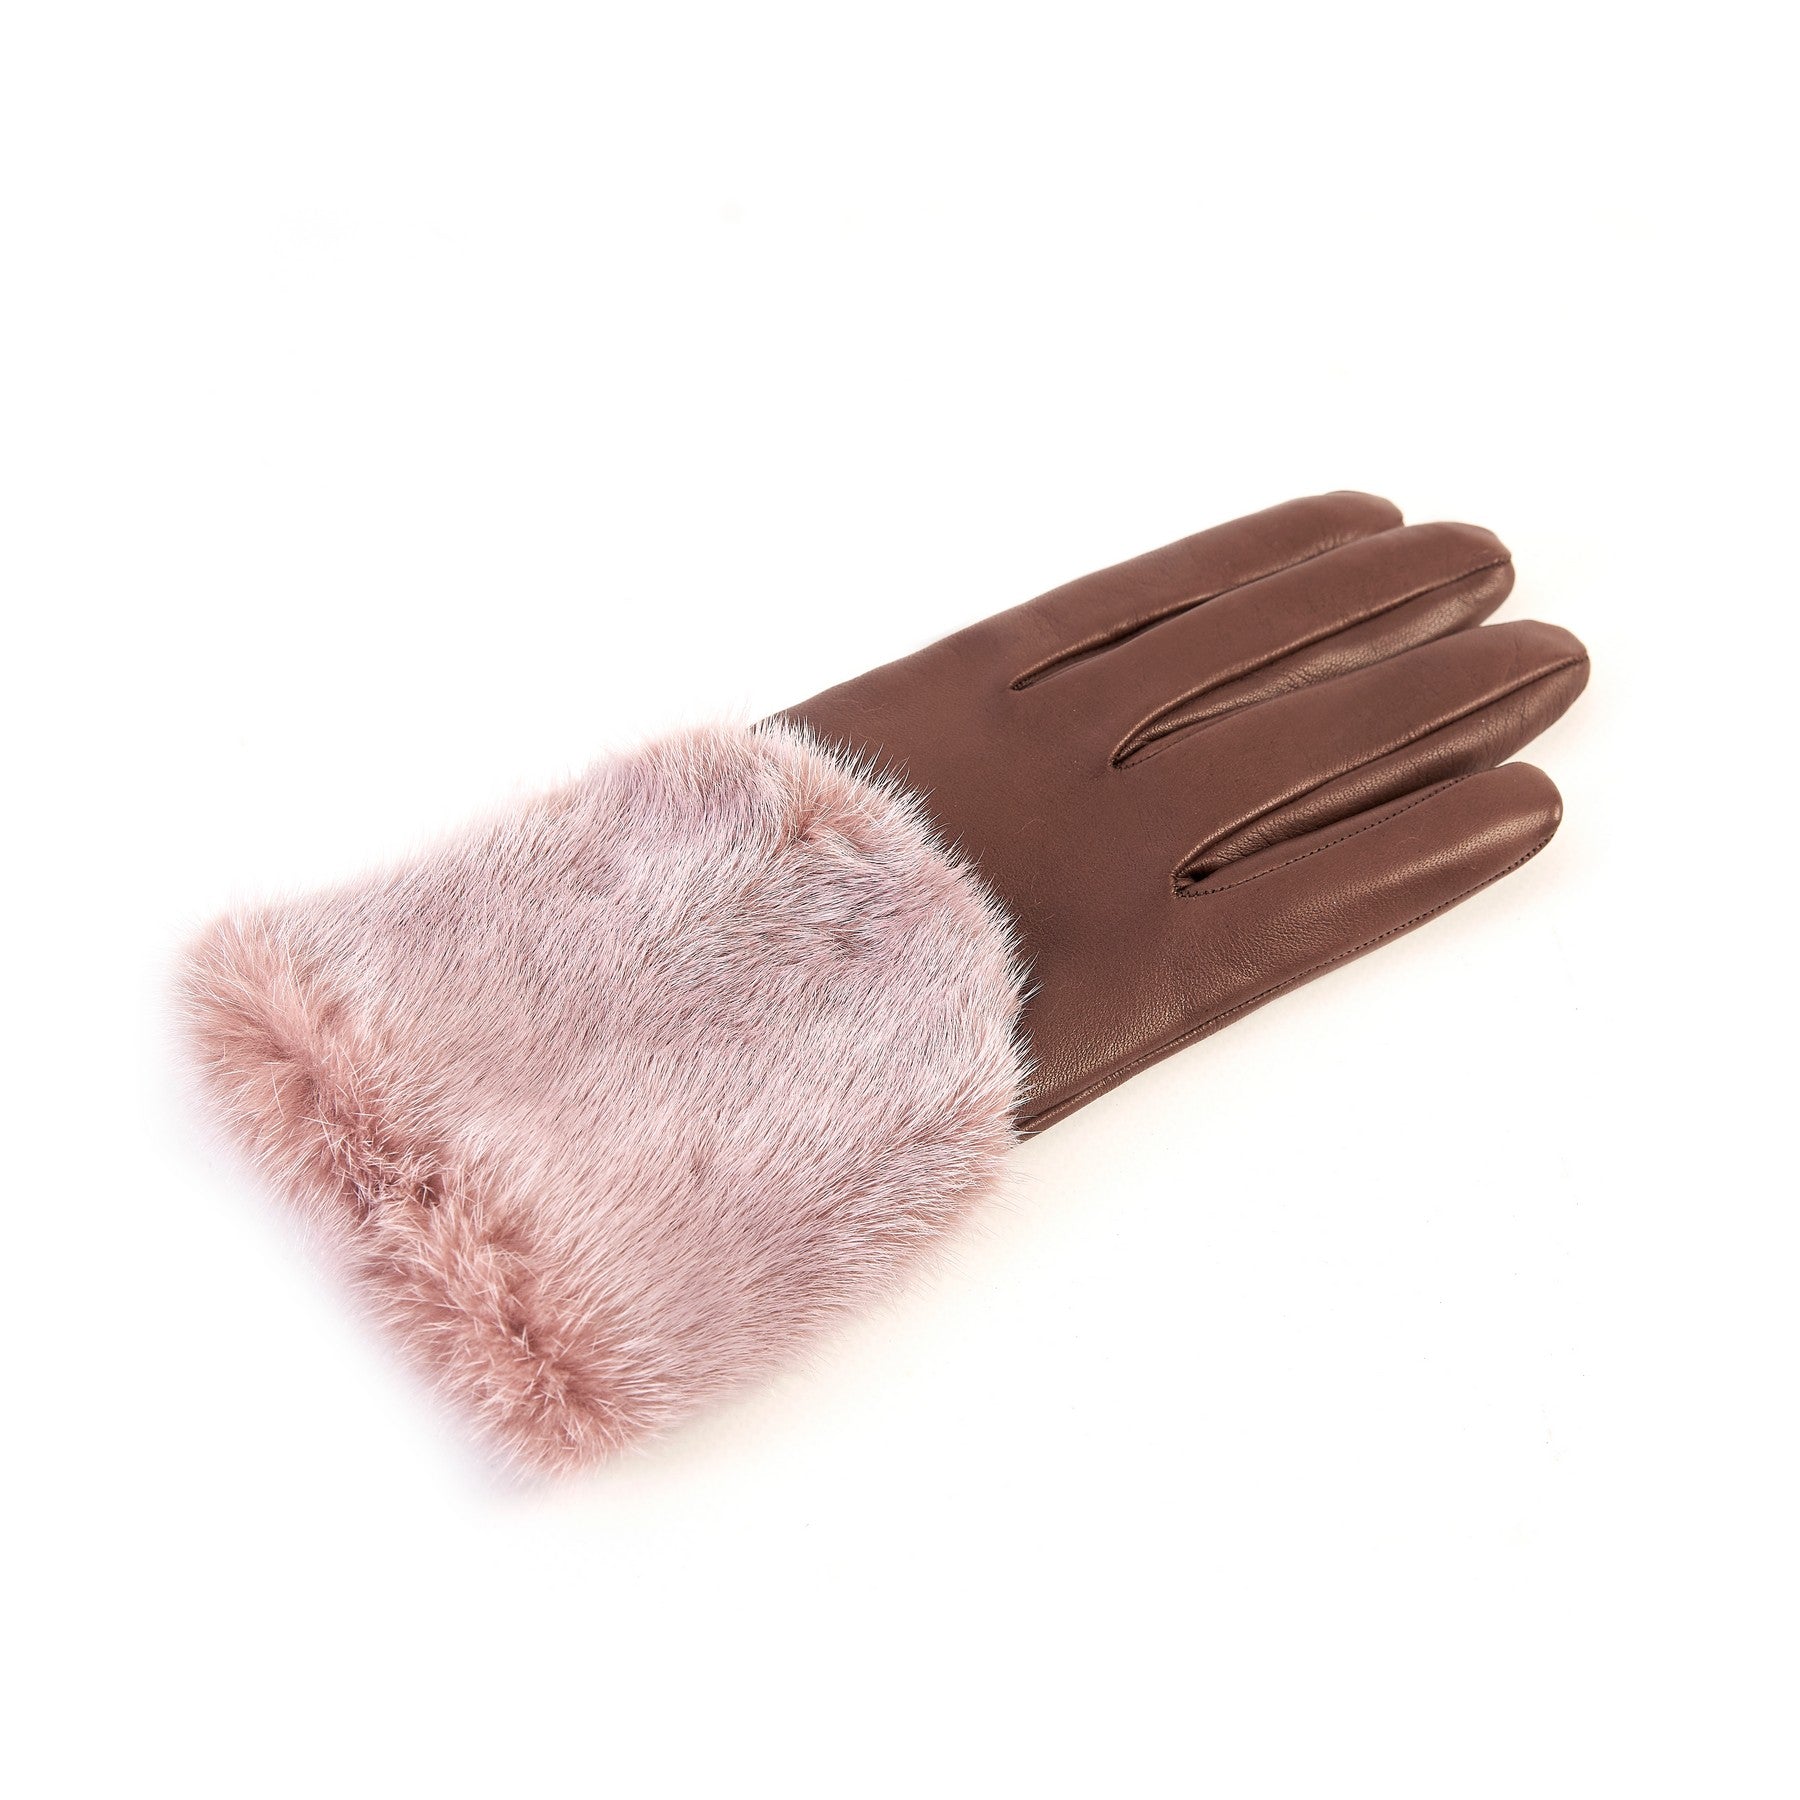 Women's chocolate nappa leather gloves with a wide real fur panel on the top and cashmere lined